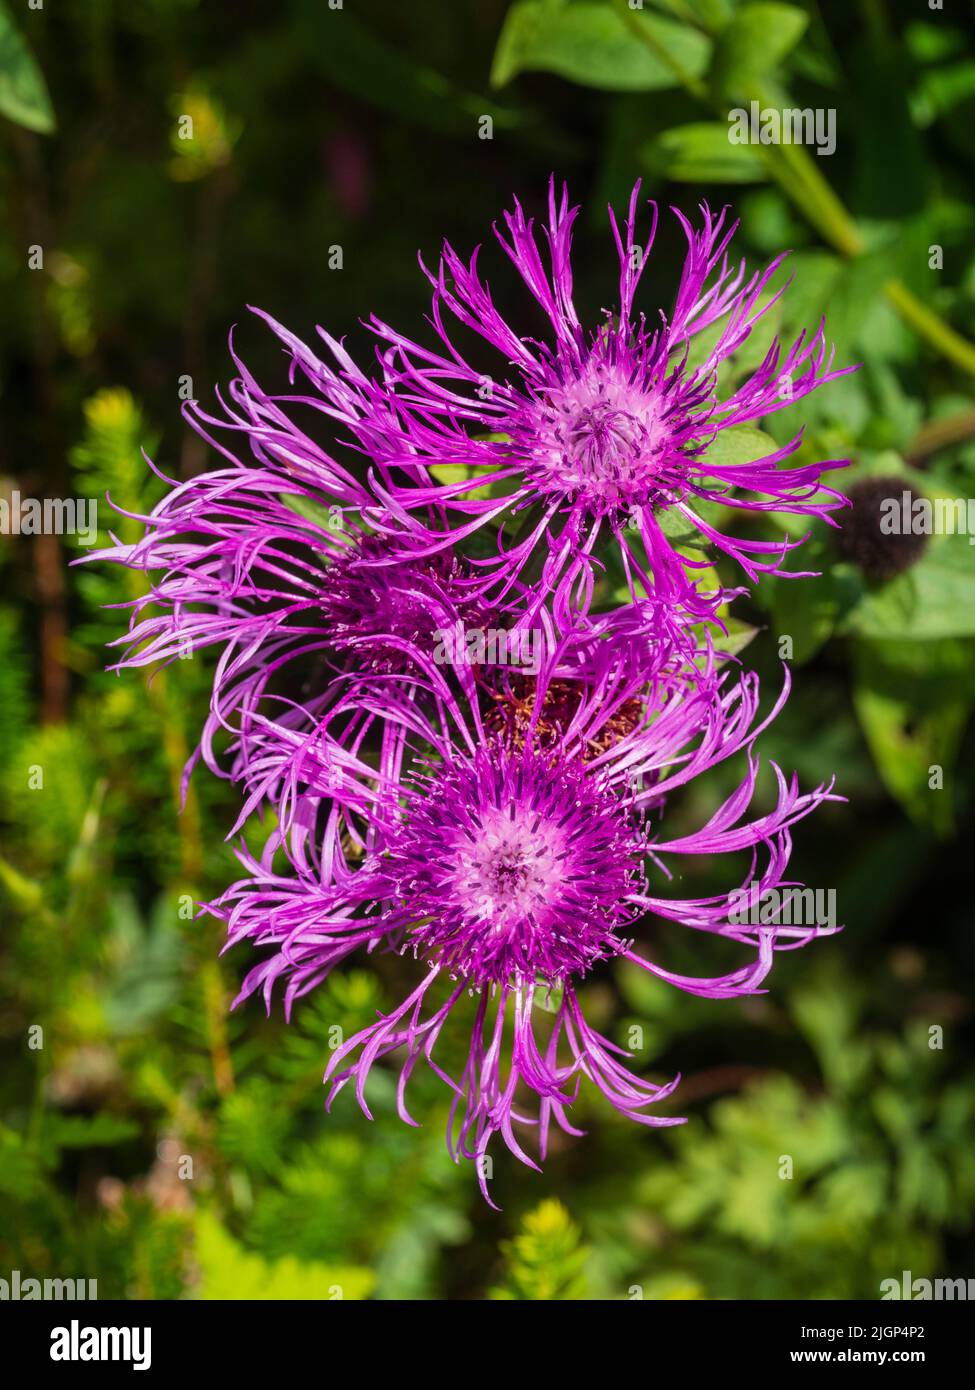 Frilly ray florets surround a red-purple heart in the hardy perennial knapweed, Centaurea 'Caramia' Stock Photo